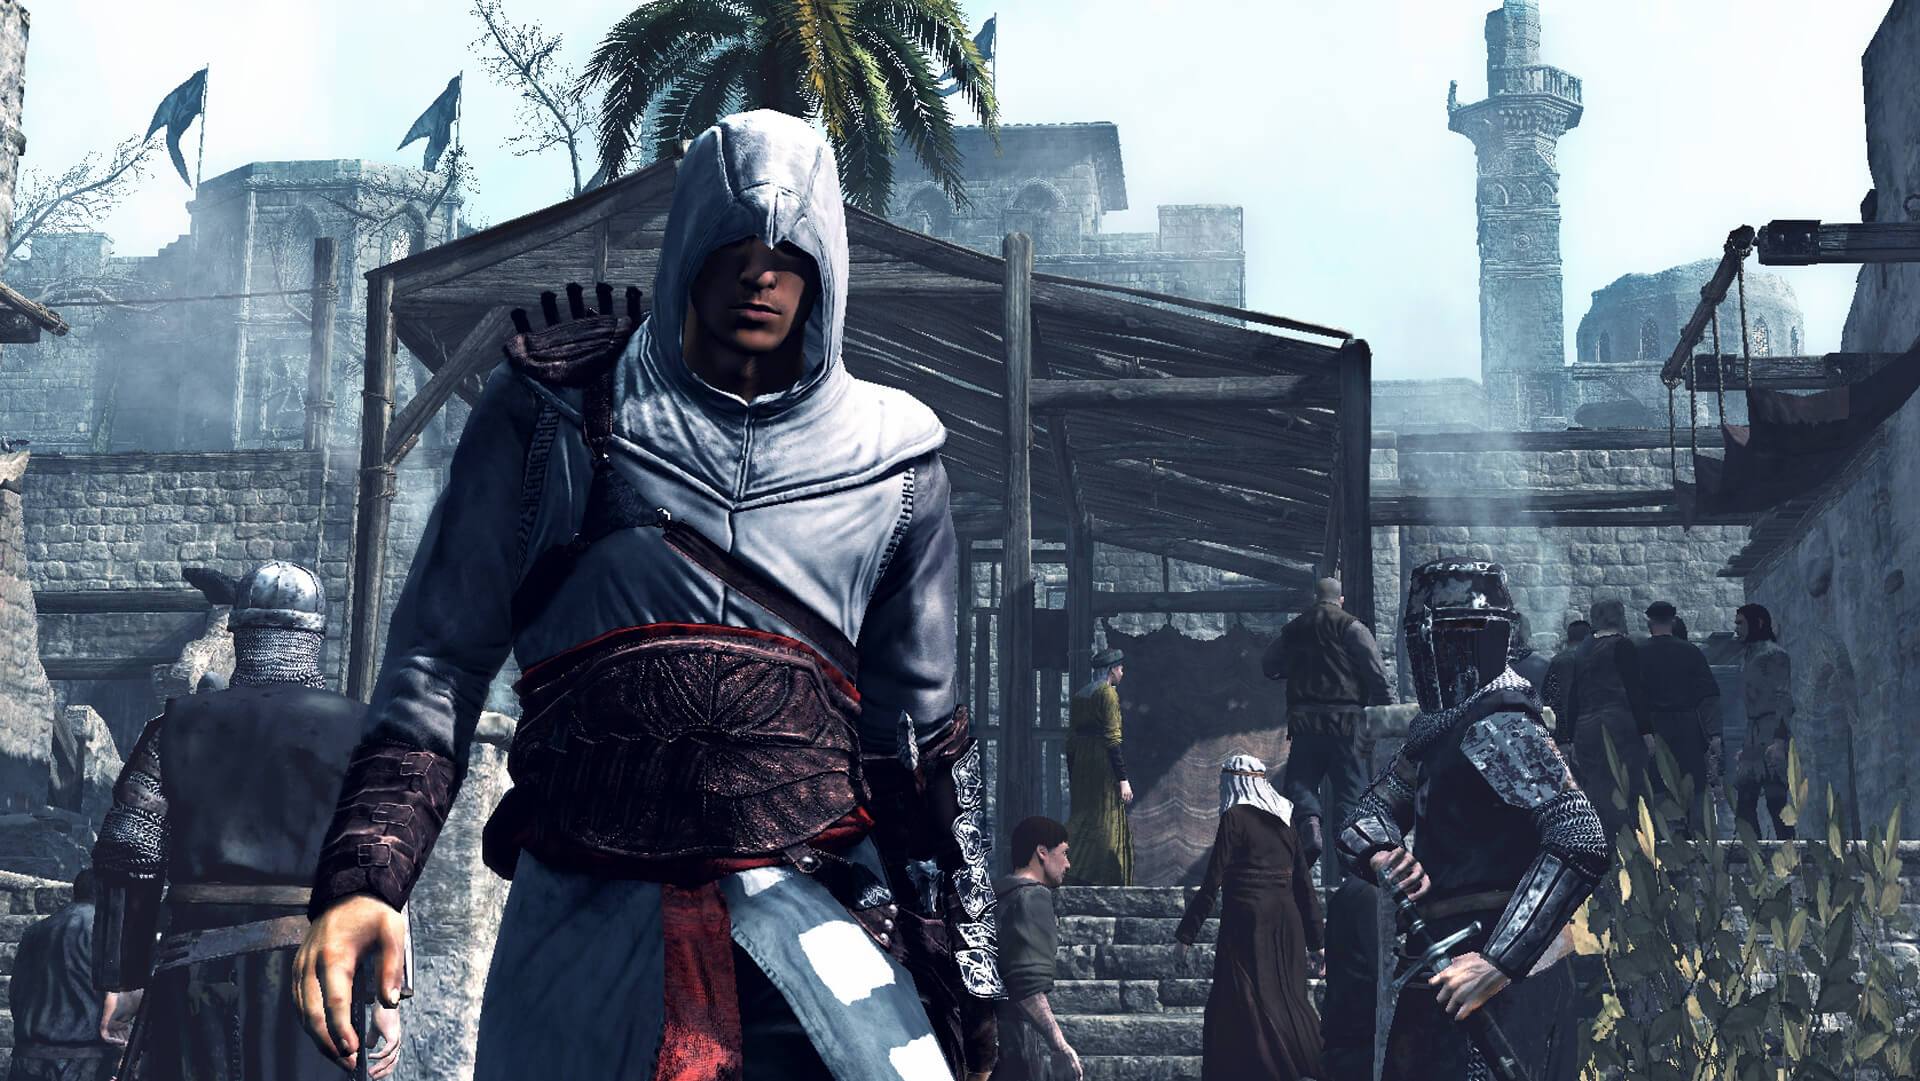 A Live-Action Assassin’s Creed Series Is Headed To Netflix